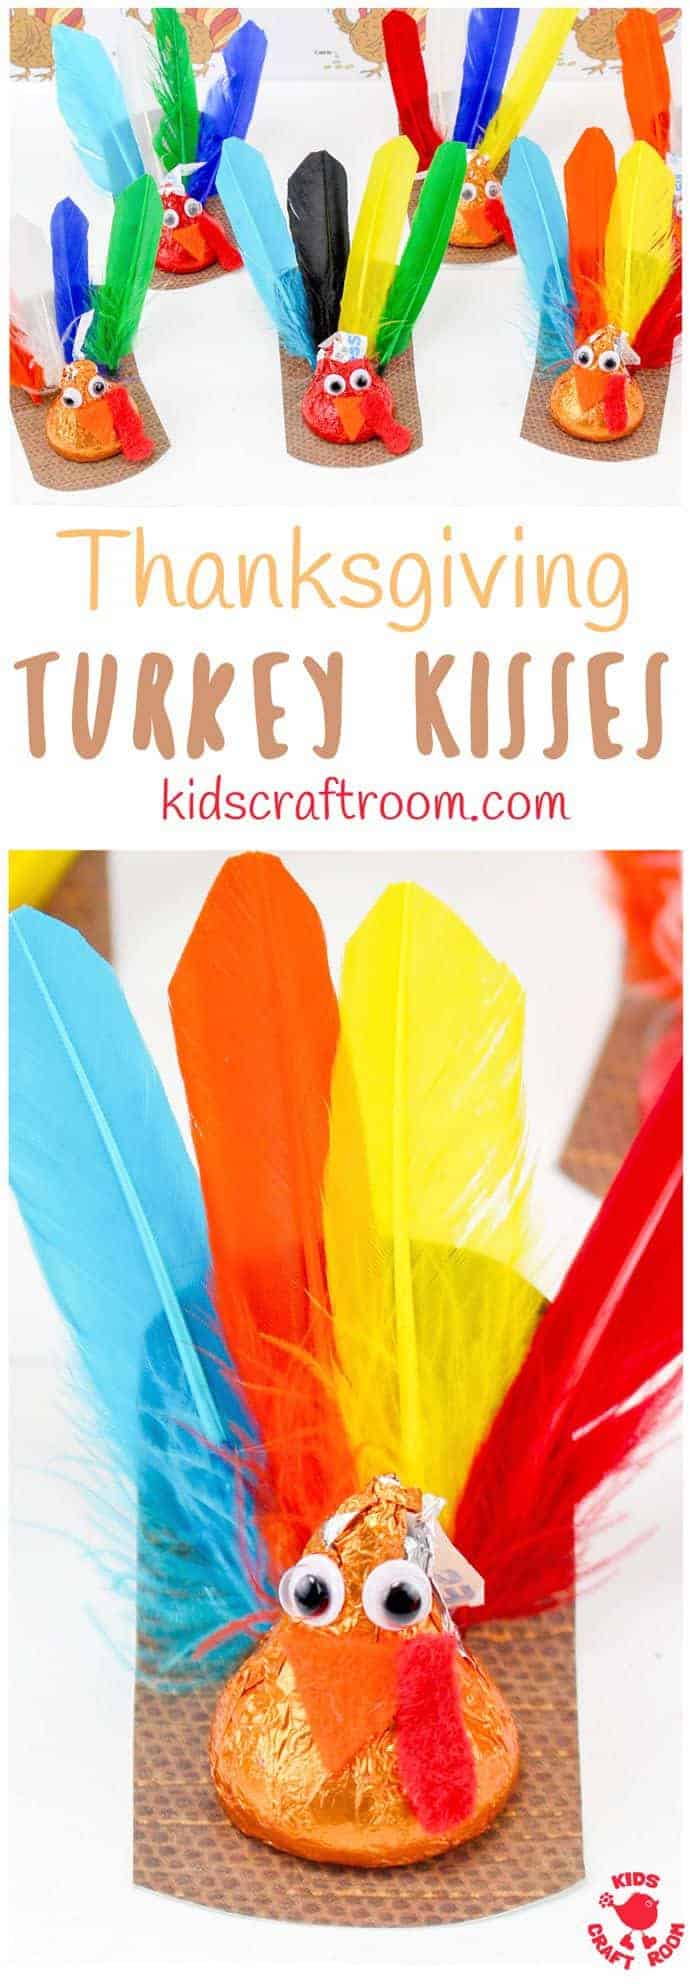 THANKSGIVING TURKEY KISSES CRAFT - This is such a fun edible Fall craft for kids. Who'd have thought you could turn chocolate into the cutest turkey craft ever! Use them as Thanksgiving favors or placeholders or just as Thanksgiving treats for friends and family Yum! #Thanksgiving #turkey #turkeycrafts #thanksgivingcrafts #kidscrafts #HersheyKisses #Fall #Fallcraft #ediblecraft #foodcraft #kidscraftroom